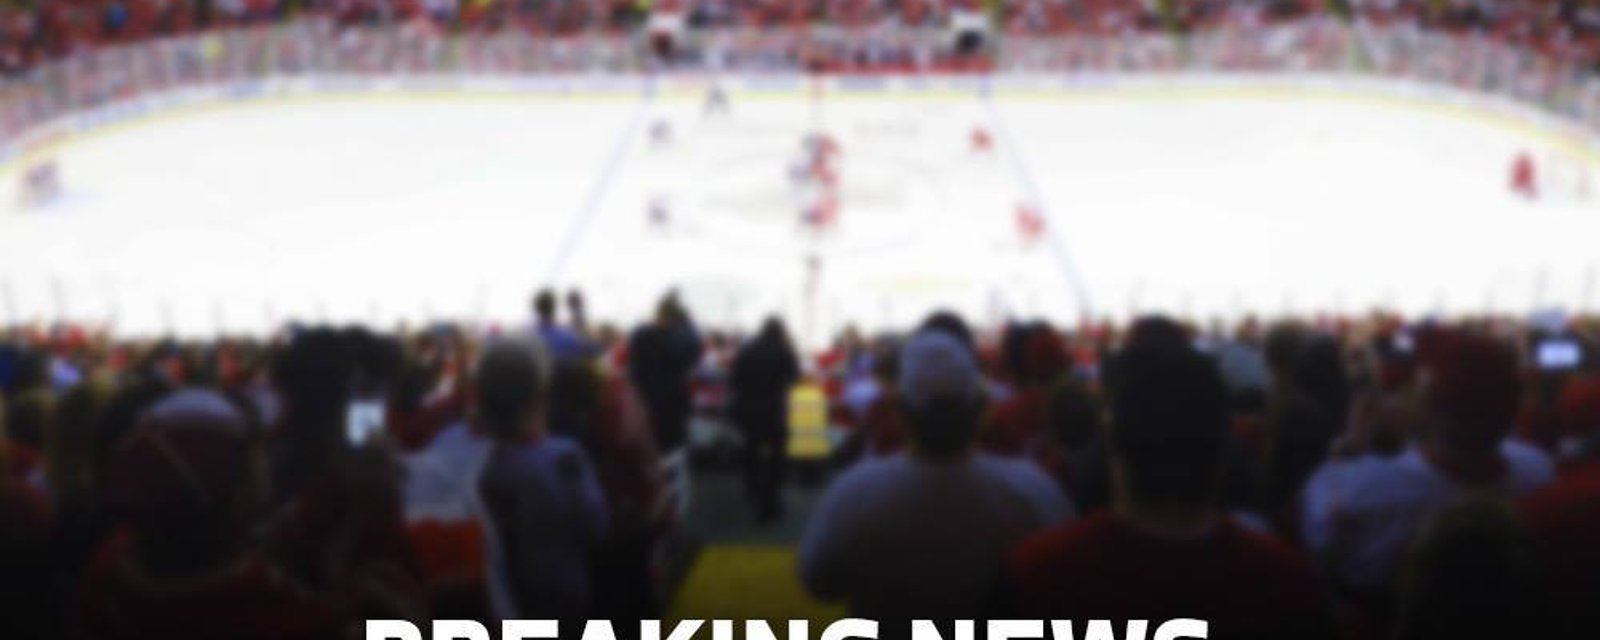 Breaking: NHL team president threatens to relocate his team.